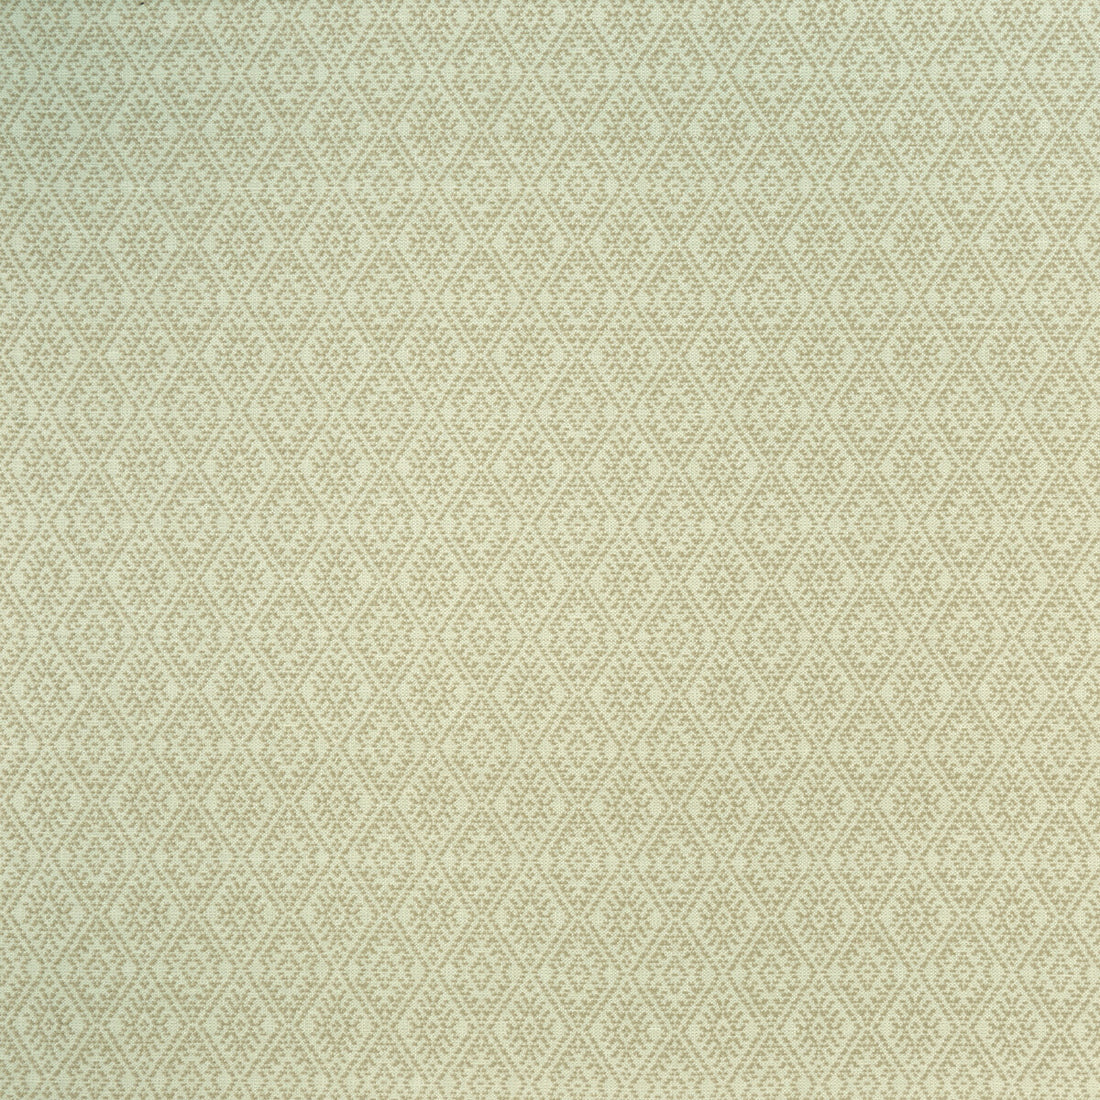 Hampstead fabric in natural color - pattern F1005/04.CAC.0 - by Clarke And Clarke in the Clarke &amp; Clarke Halcyon collection